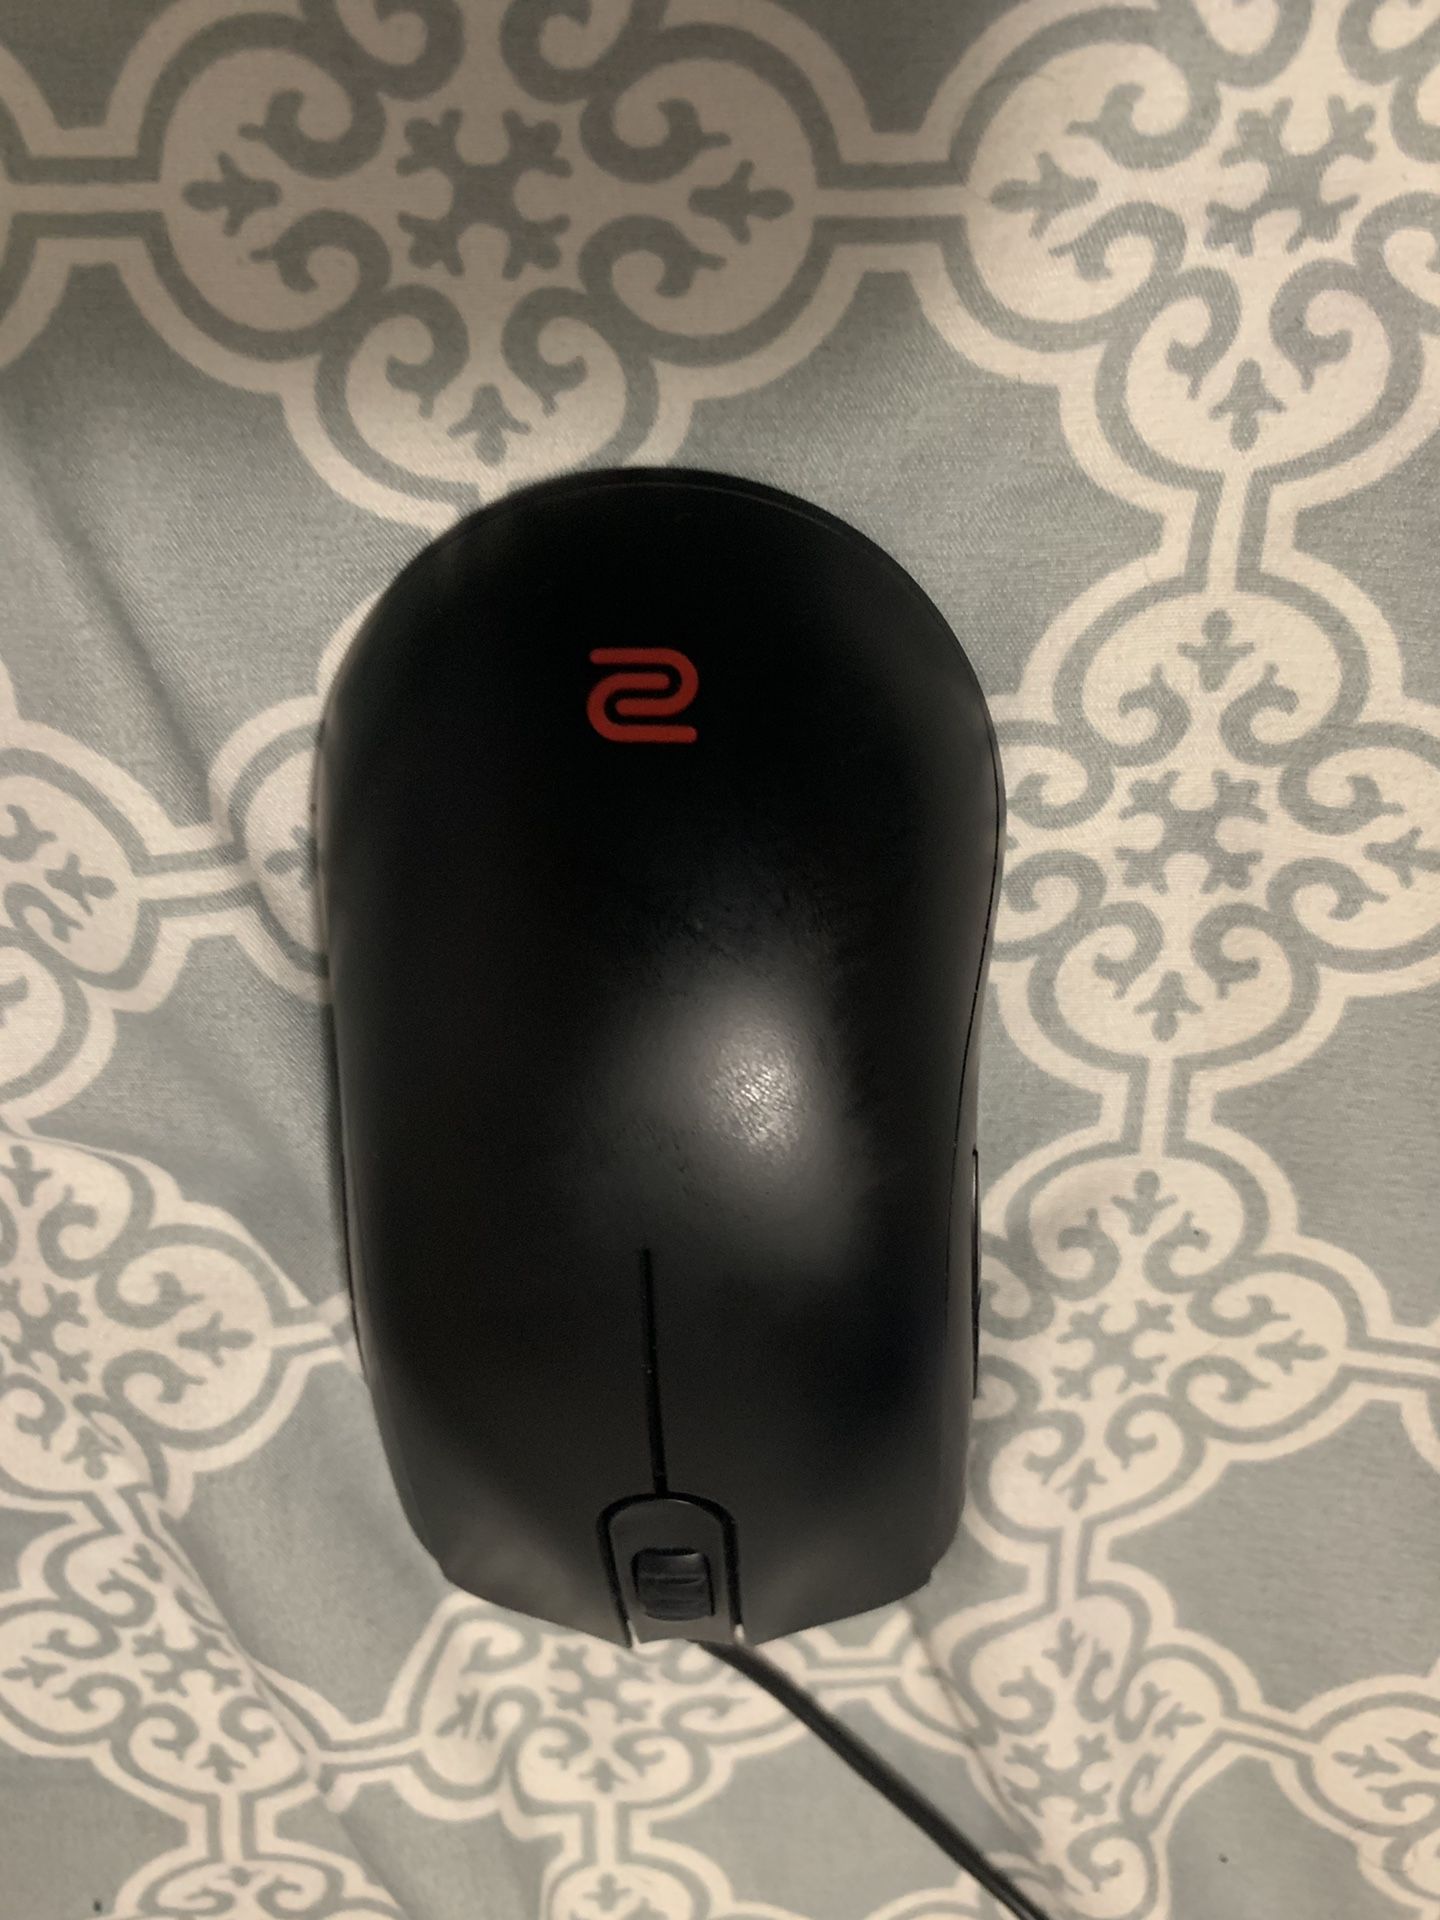 Zowie Fk1 Gaming Mouse